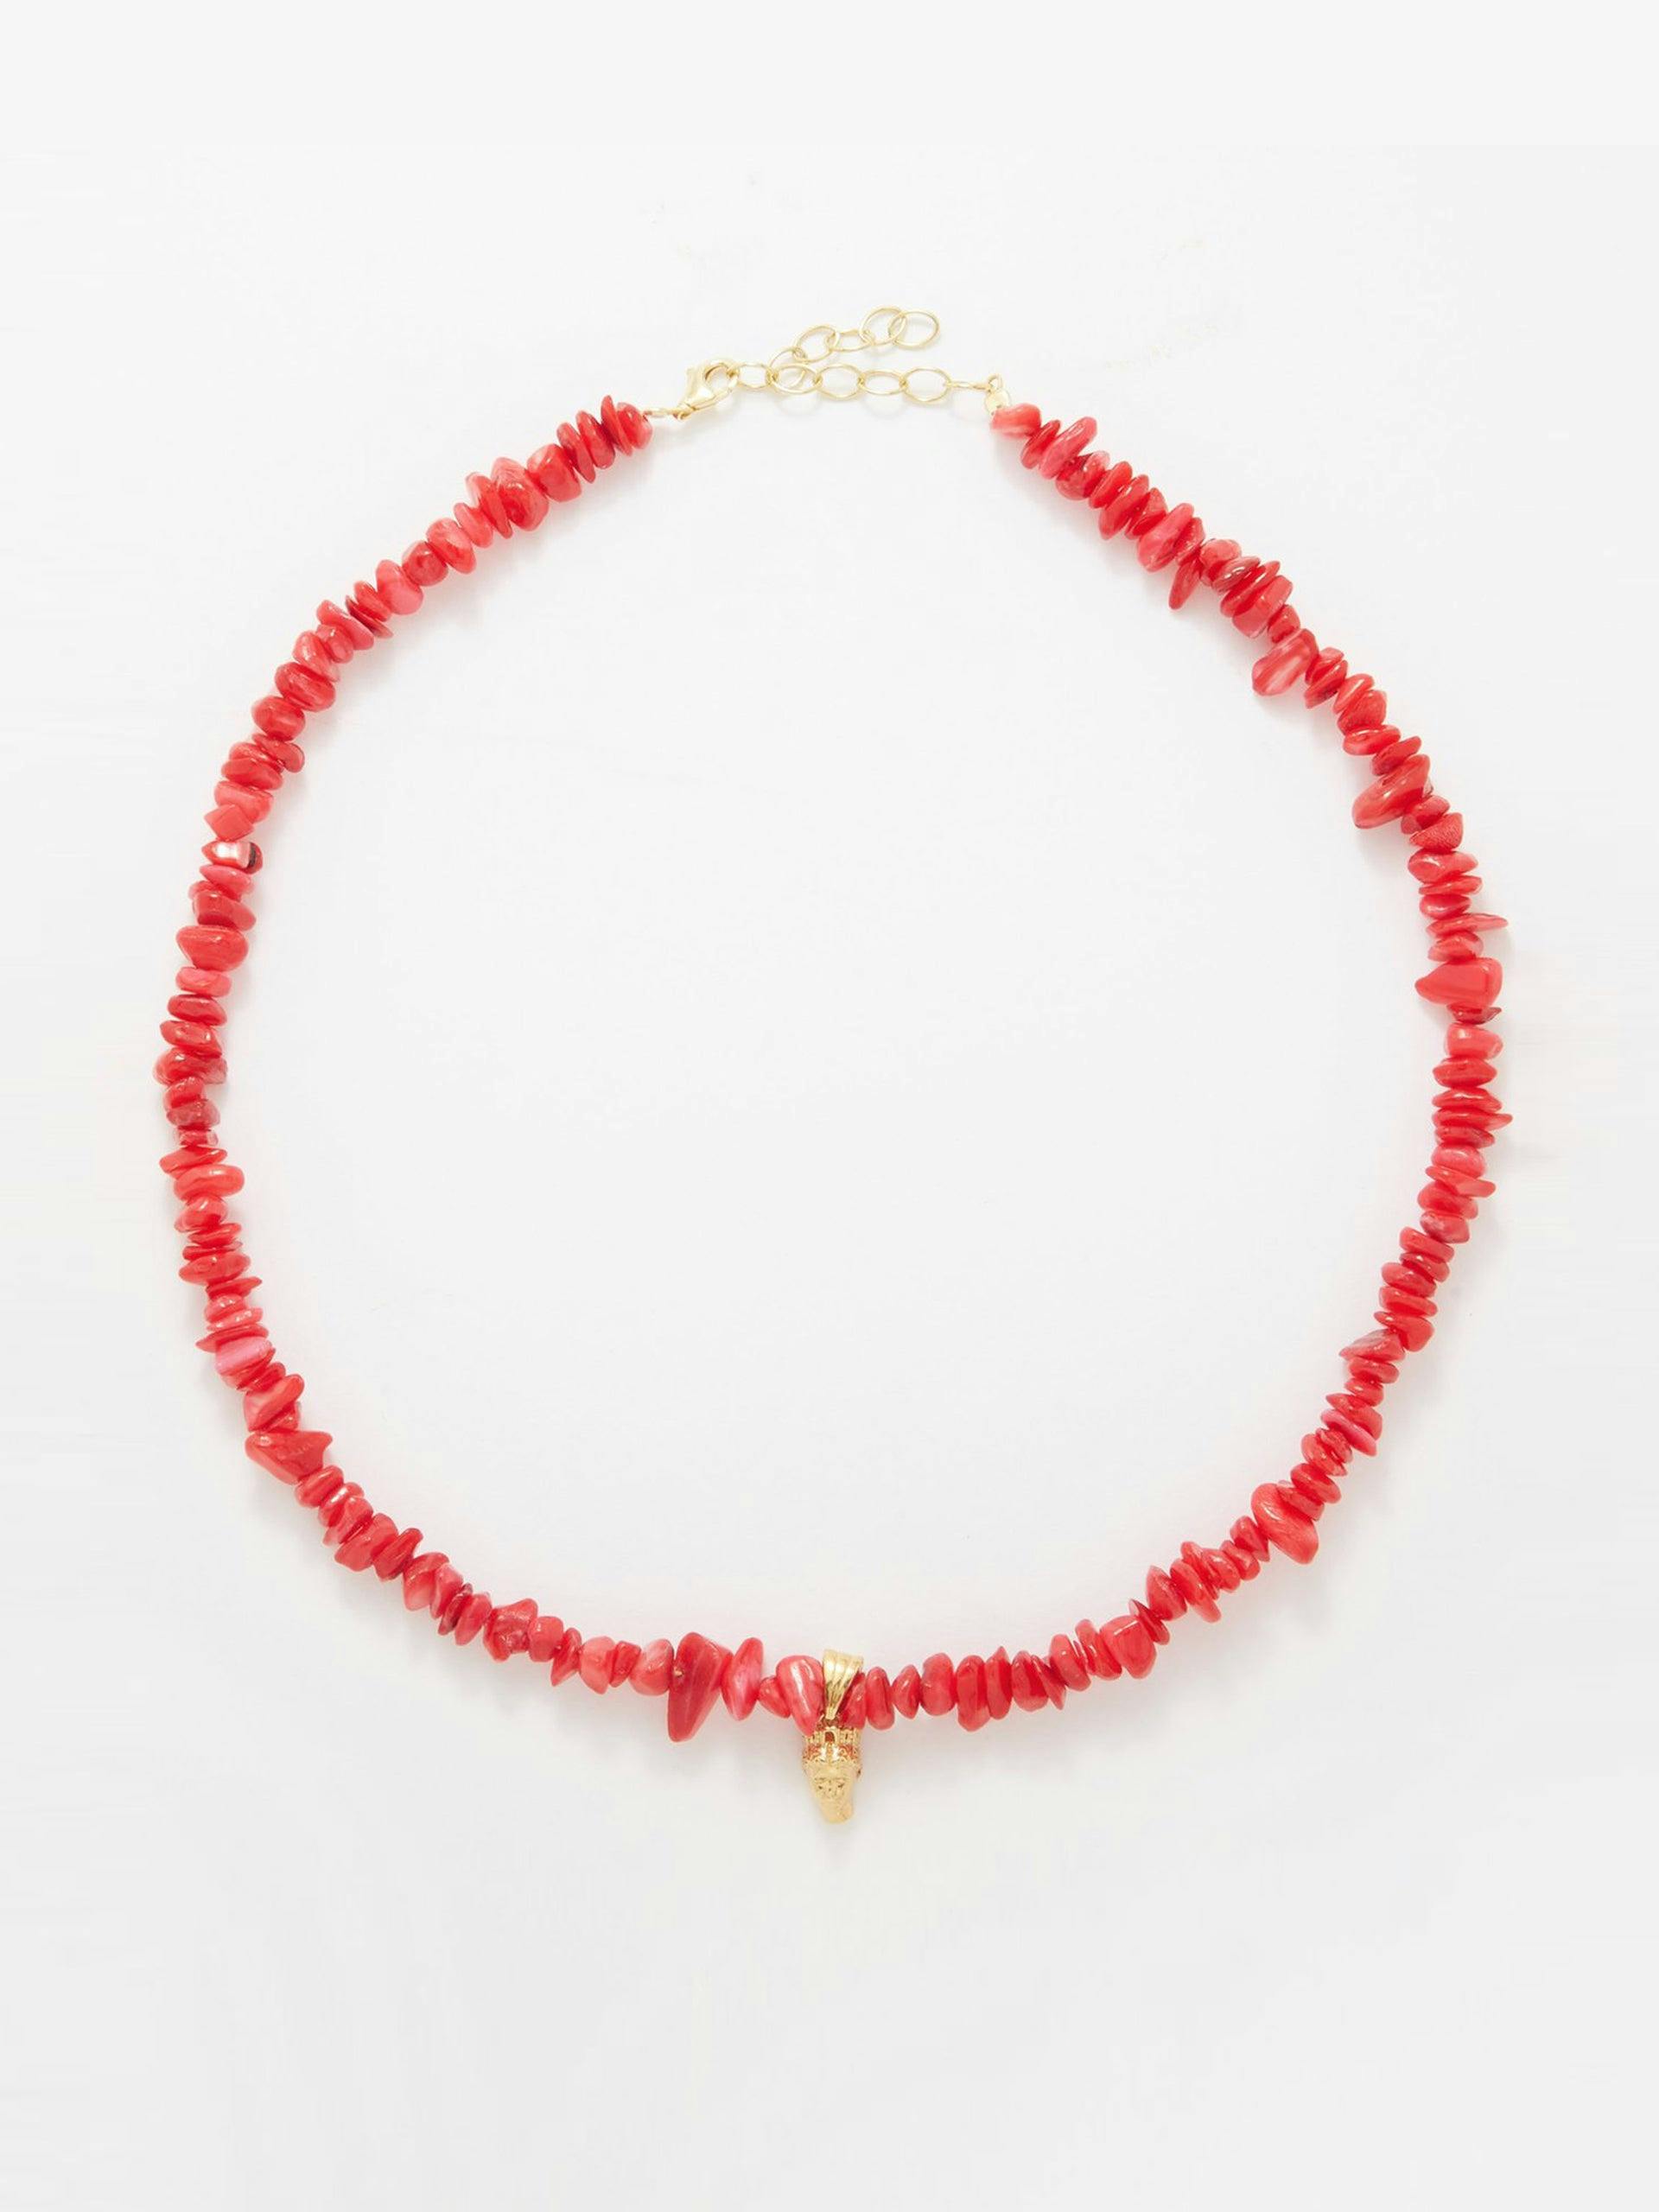 Red coral and gold-vermeil necklace